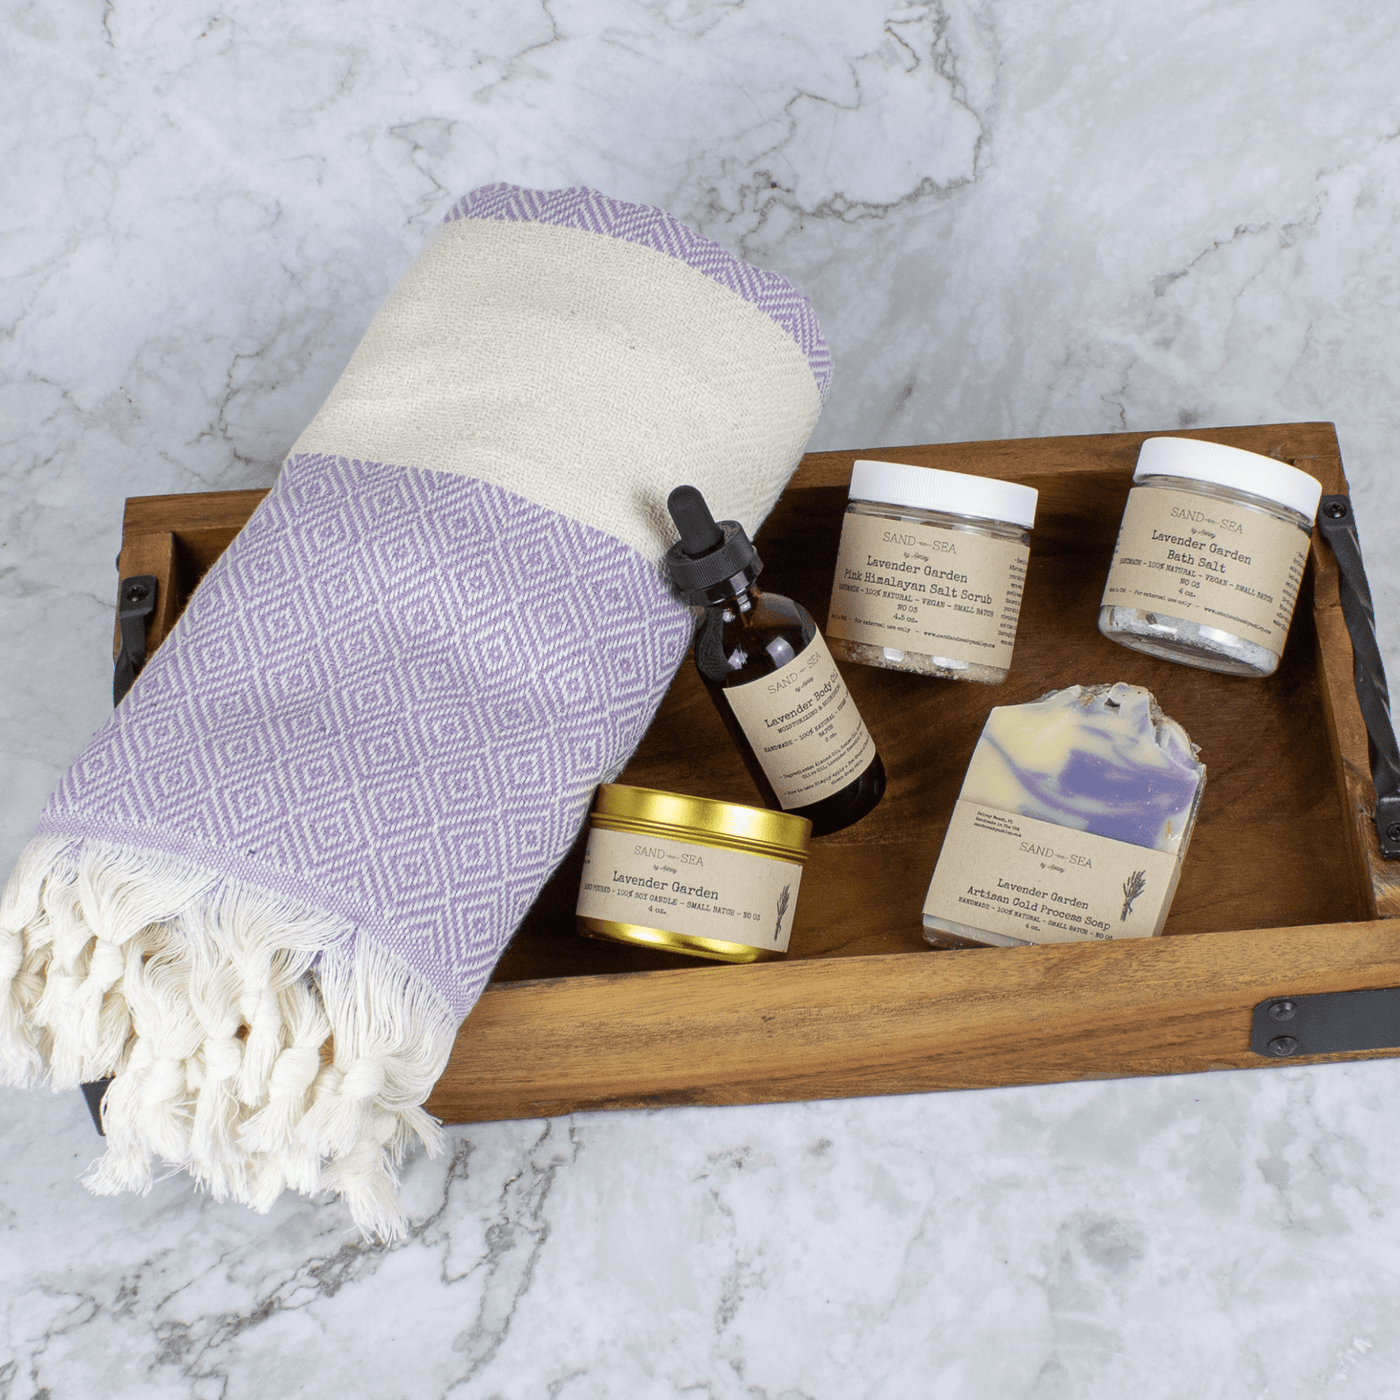 Spa Gift Set for Mother's Day - Relaxing, Destress, Skin Care Package for Mom - Sand & Sea by Ashley